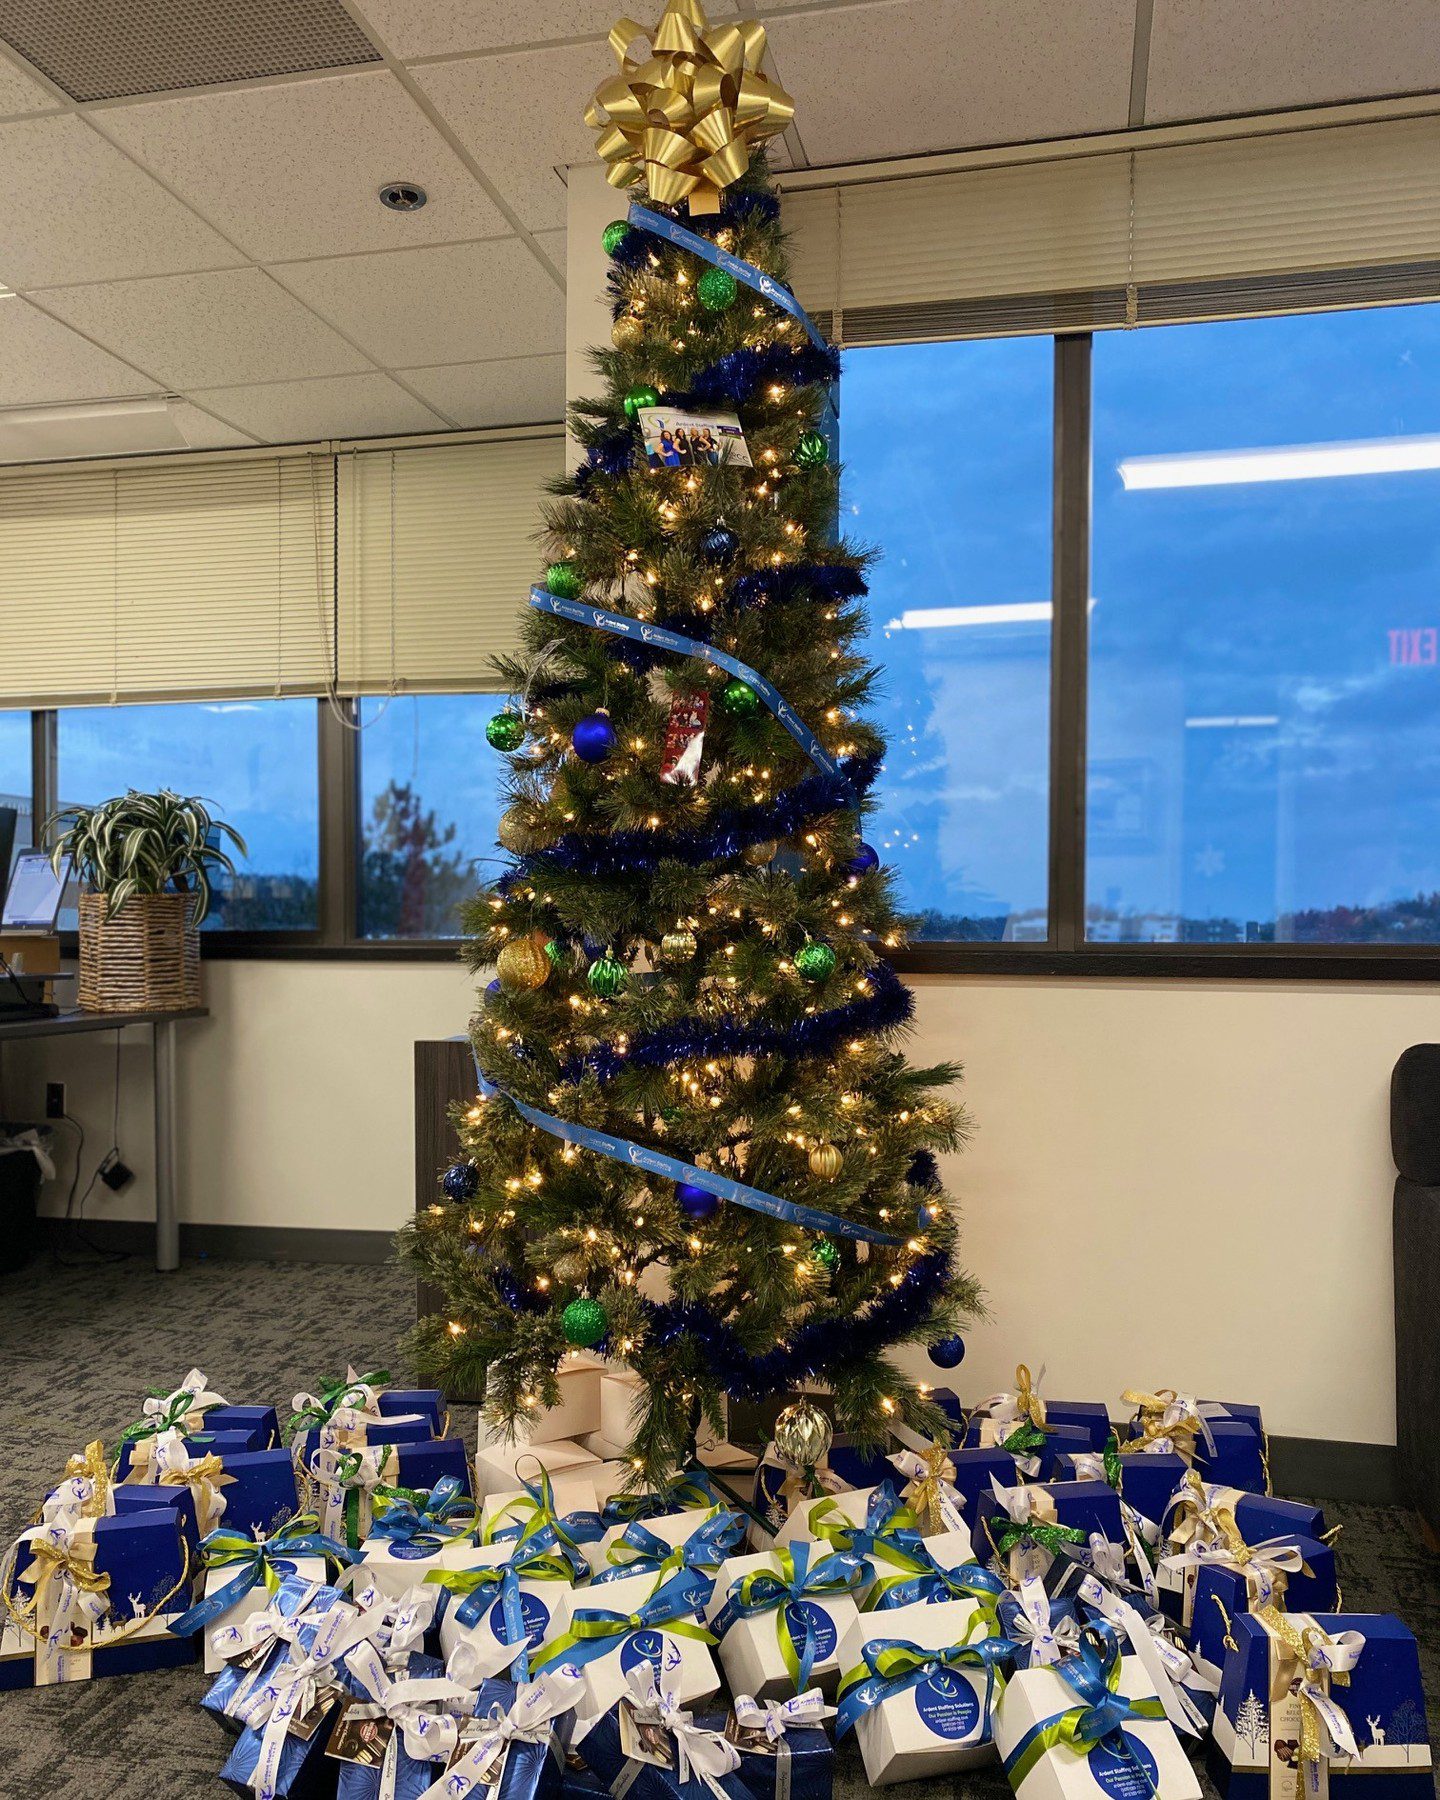 Santa stopped by our office little early this year! Our favorite part of the Holiday Season is giving to others.